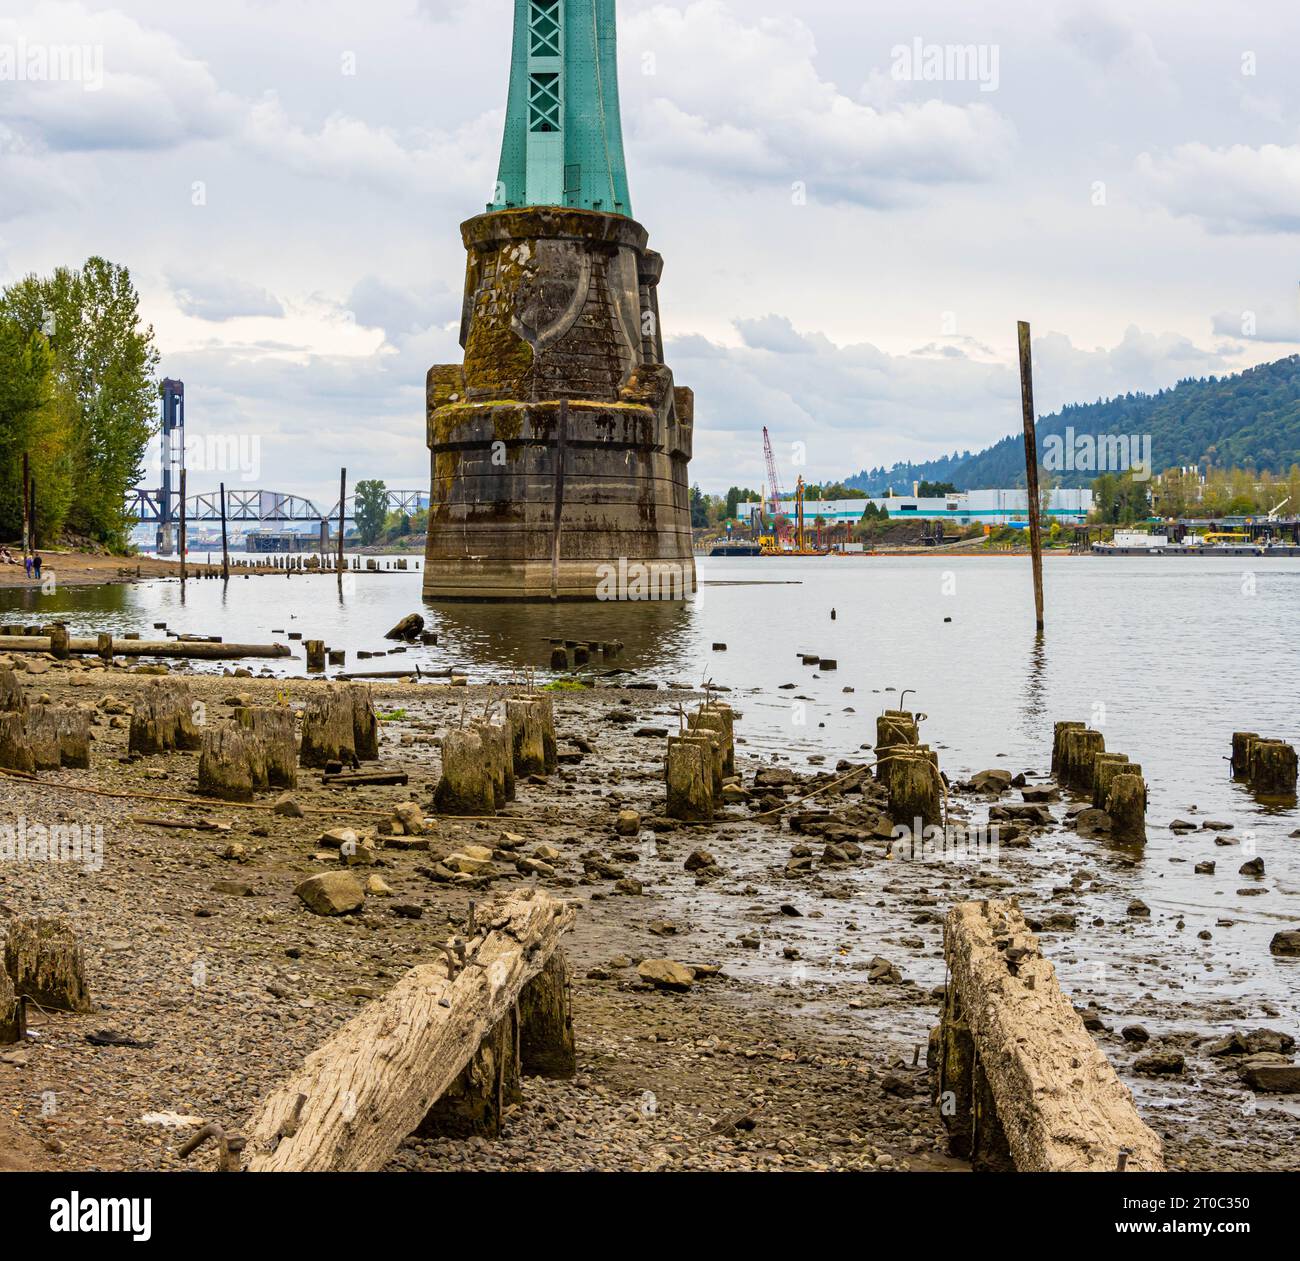 Wooden Remains of Old Ferry Landing and The Bridge Support of Gothic -Cathedral Styled St. Johns Bridge, Portland, Oregon, USA Stock Photo